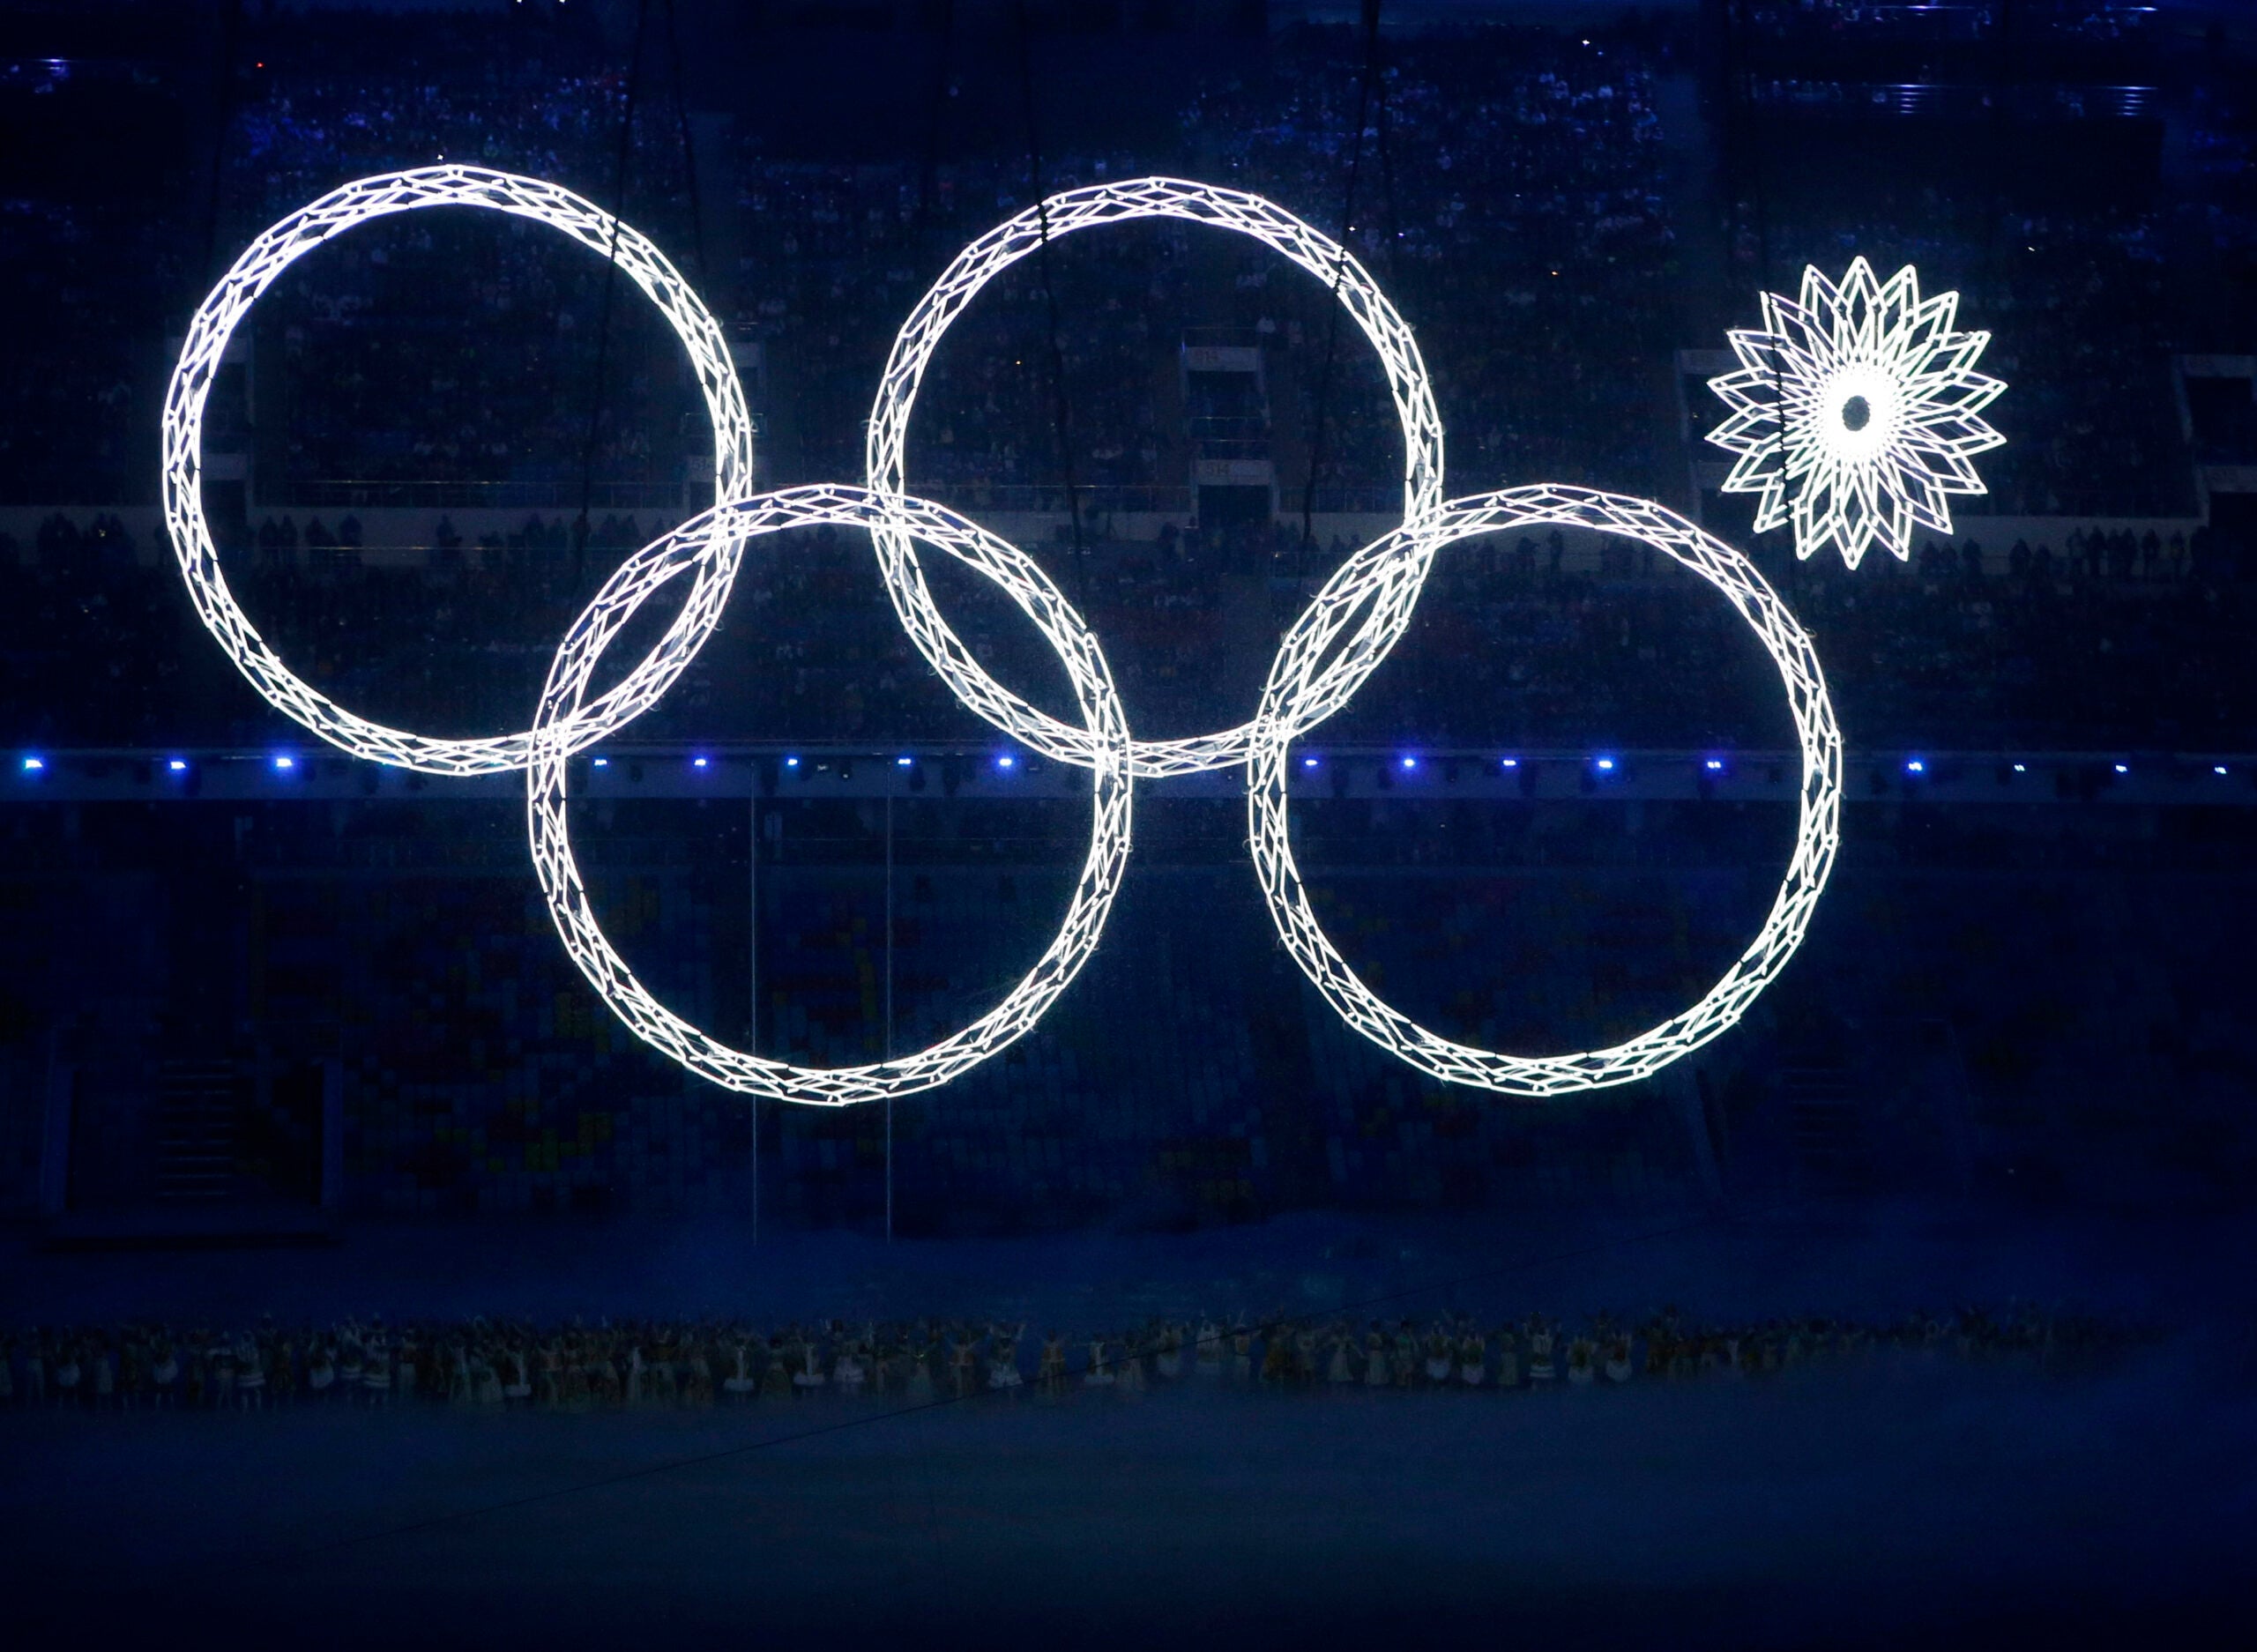 Scenes from the Winter Olympics opening ceremony in Sochi